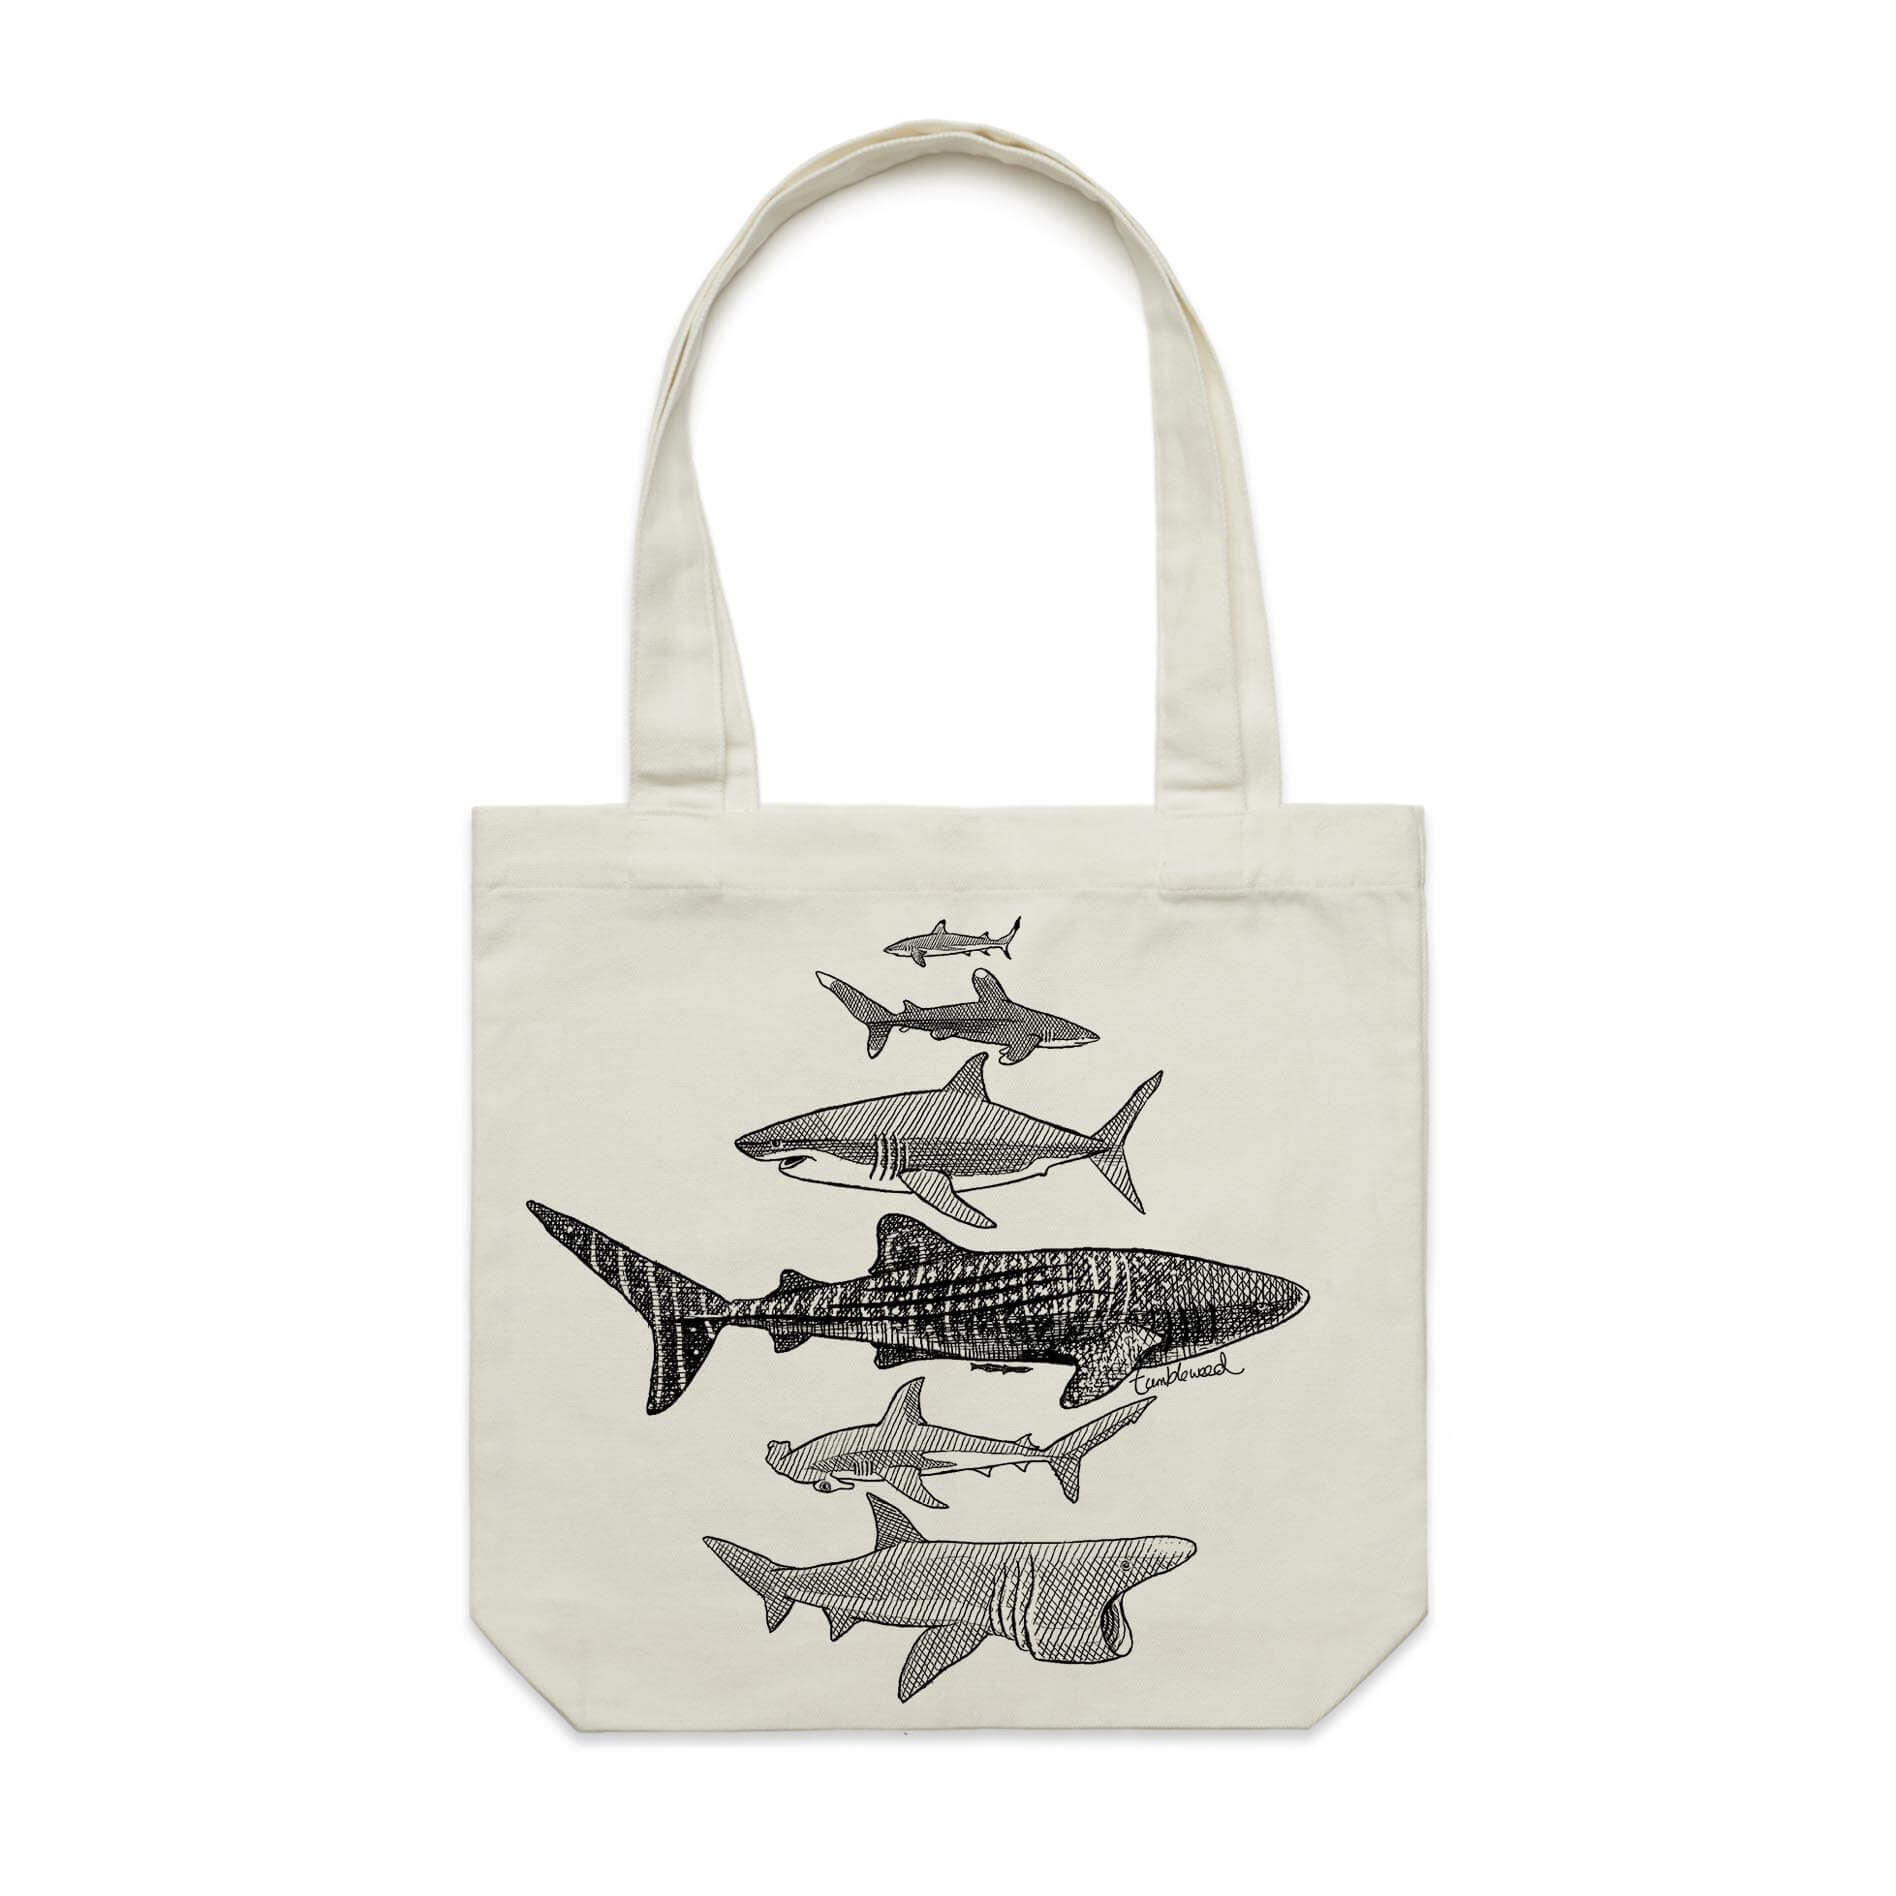 Cotton canvas tote bag with a screen printed Sharks design.